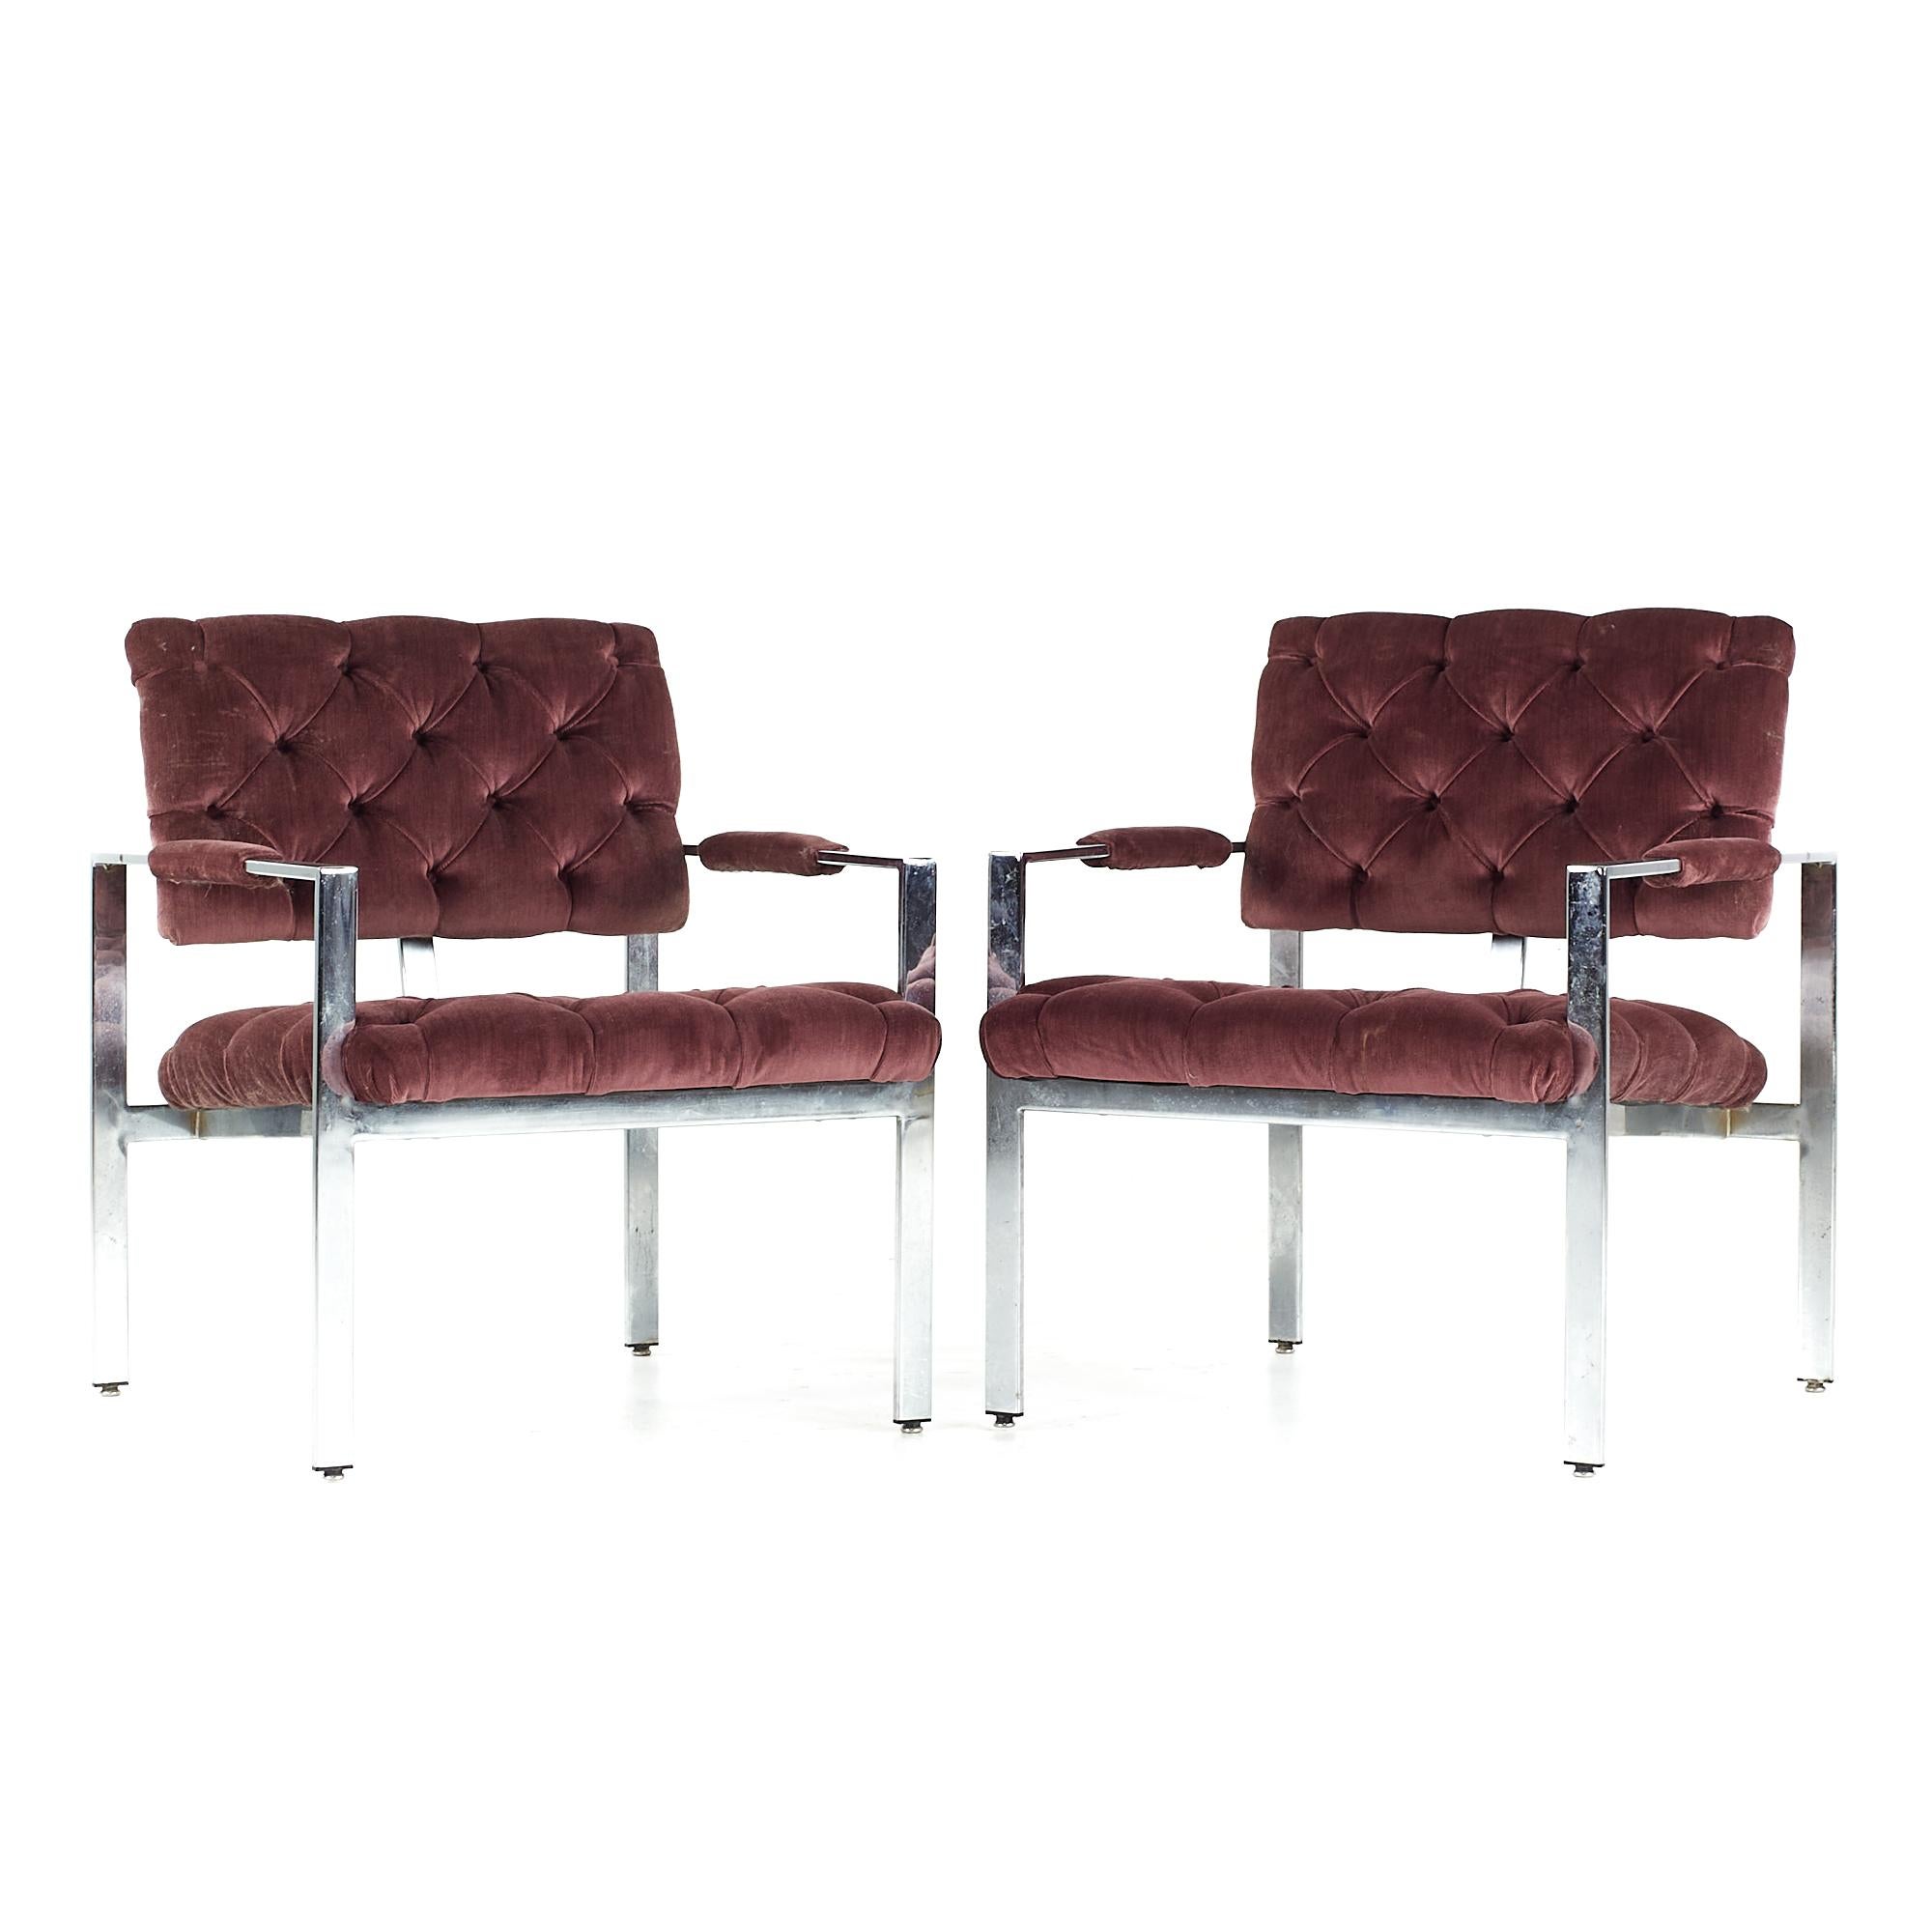 Upholstery Milo Baughman for Thayer Coggin Midcentury Chrome Tufted Arm Chairs, Set of 6 For Sale